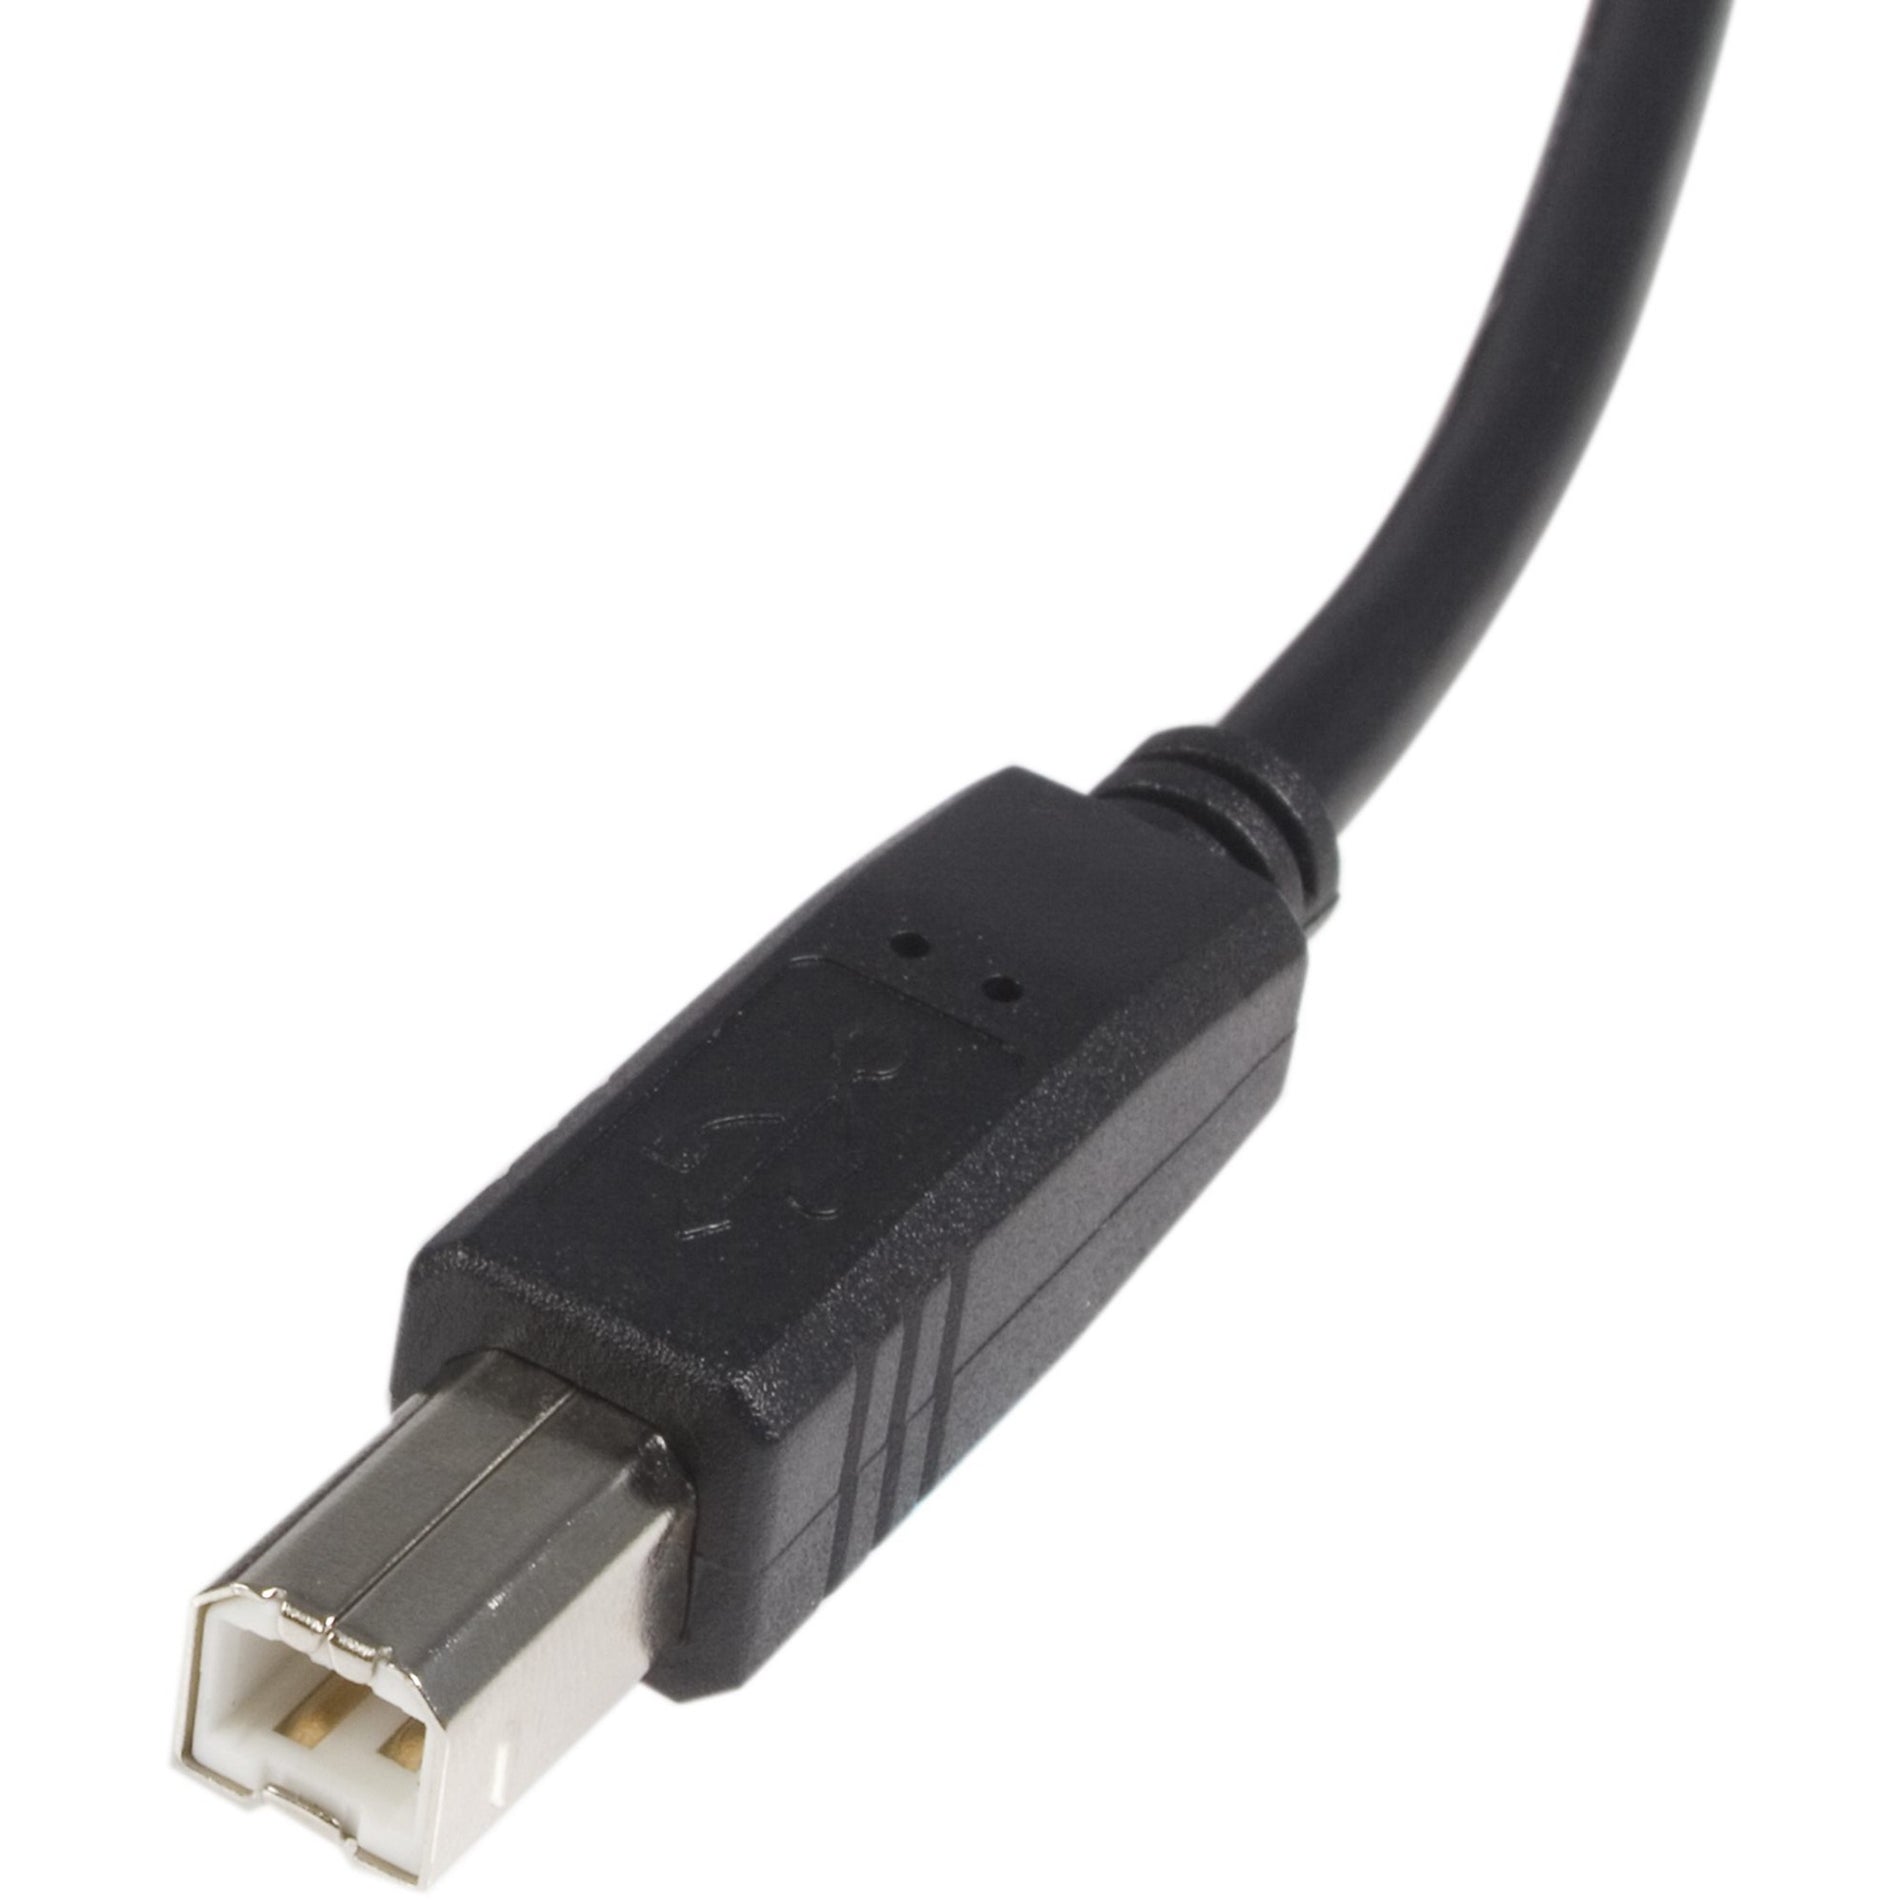 StarTech.com USB2HAB3 3ft High Speed Certified USB 2.0 Cable, Lifetime Warranty, Fast Data Transfer